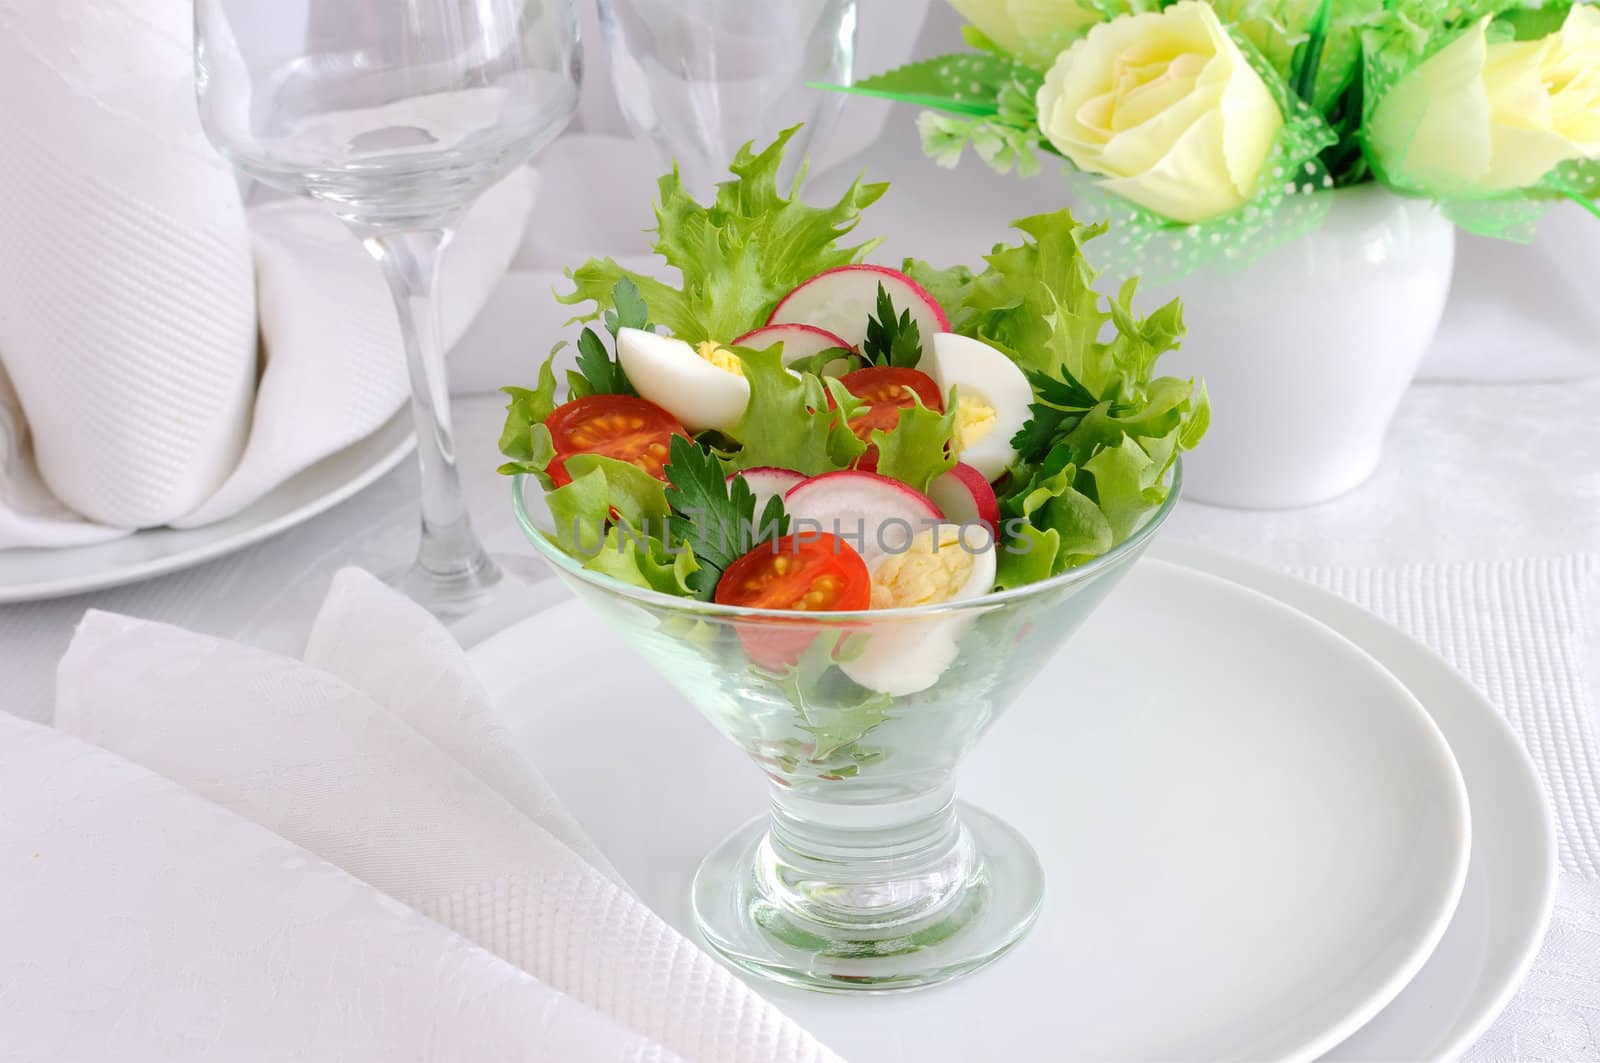 Frize salad with cherry tomatoes, radish and quail eggs